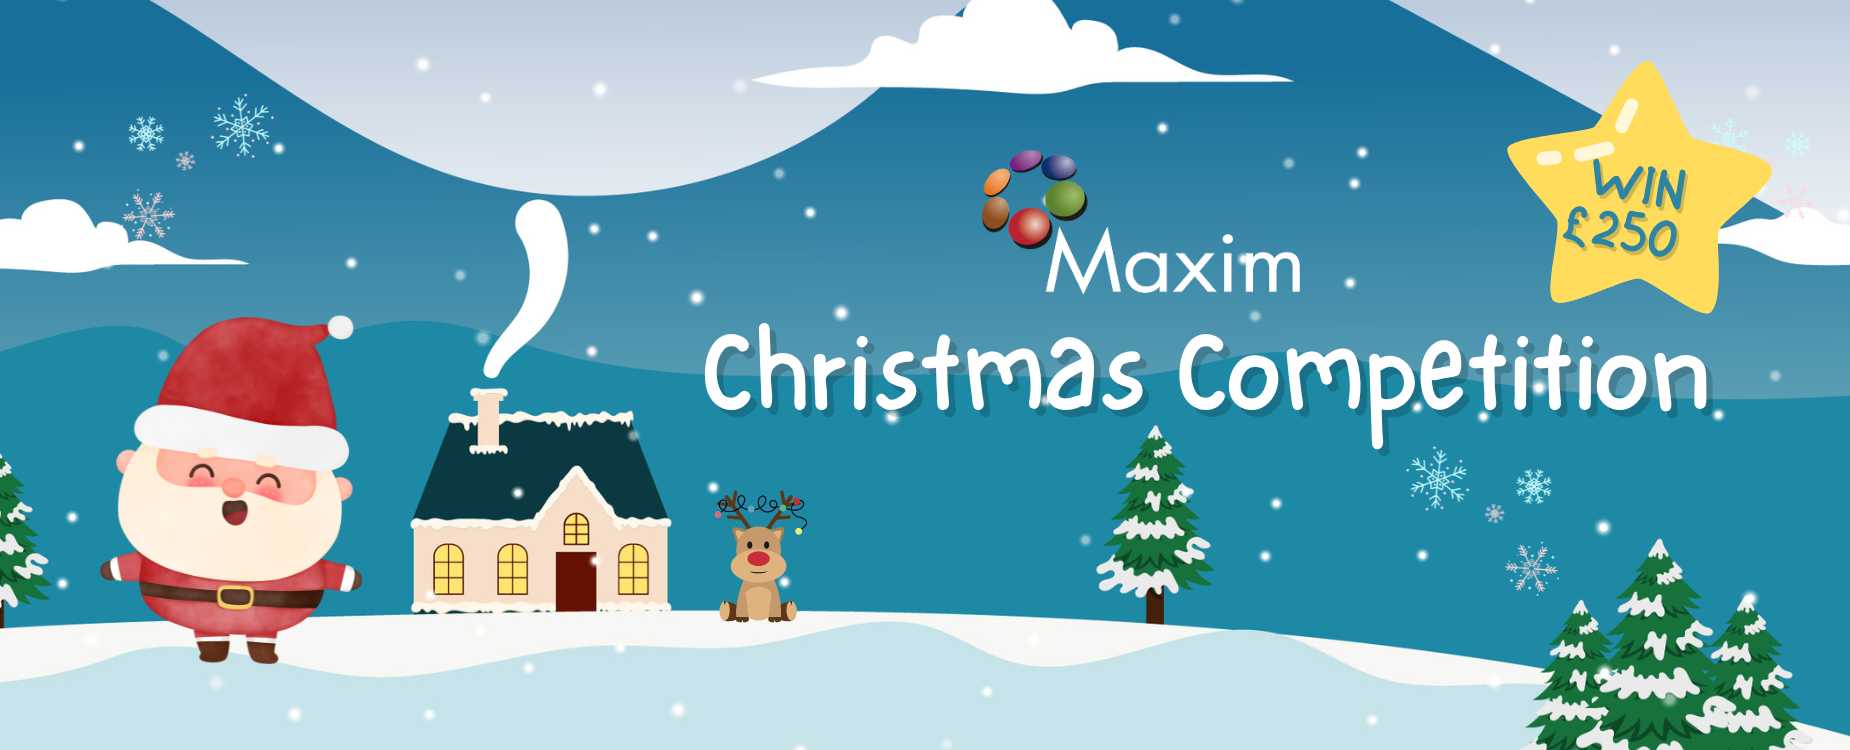 The Maxim Christmas Competition